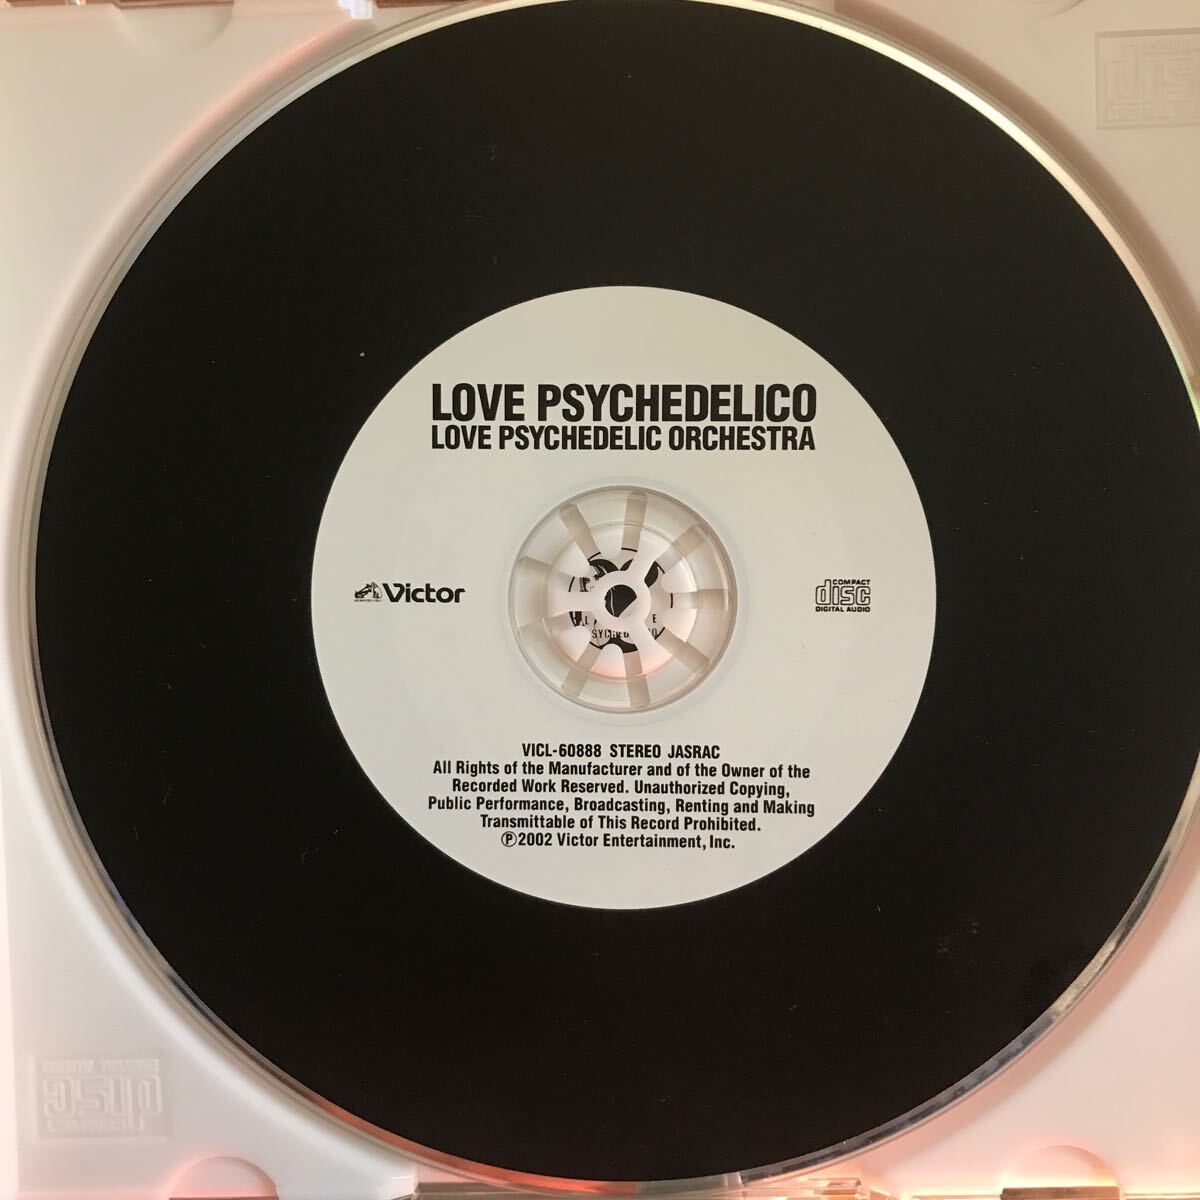 LOVE PSYCHEDELIC ORCHESTRAの画像3